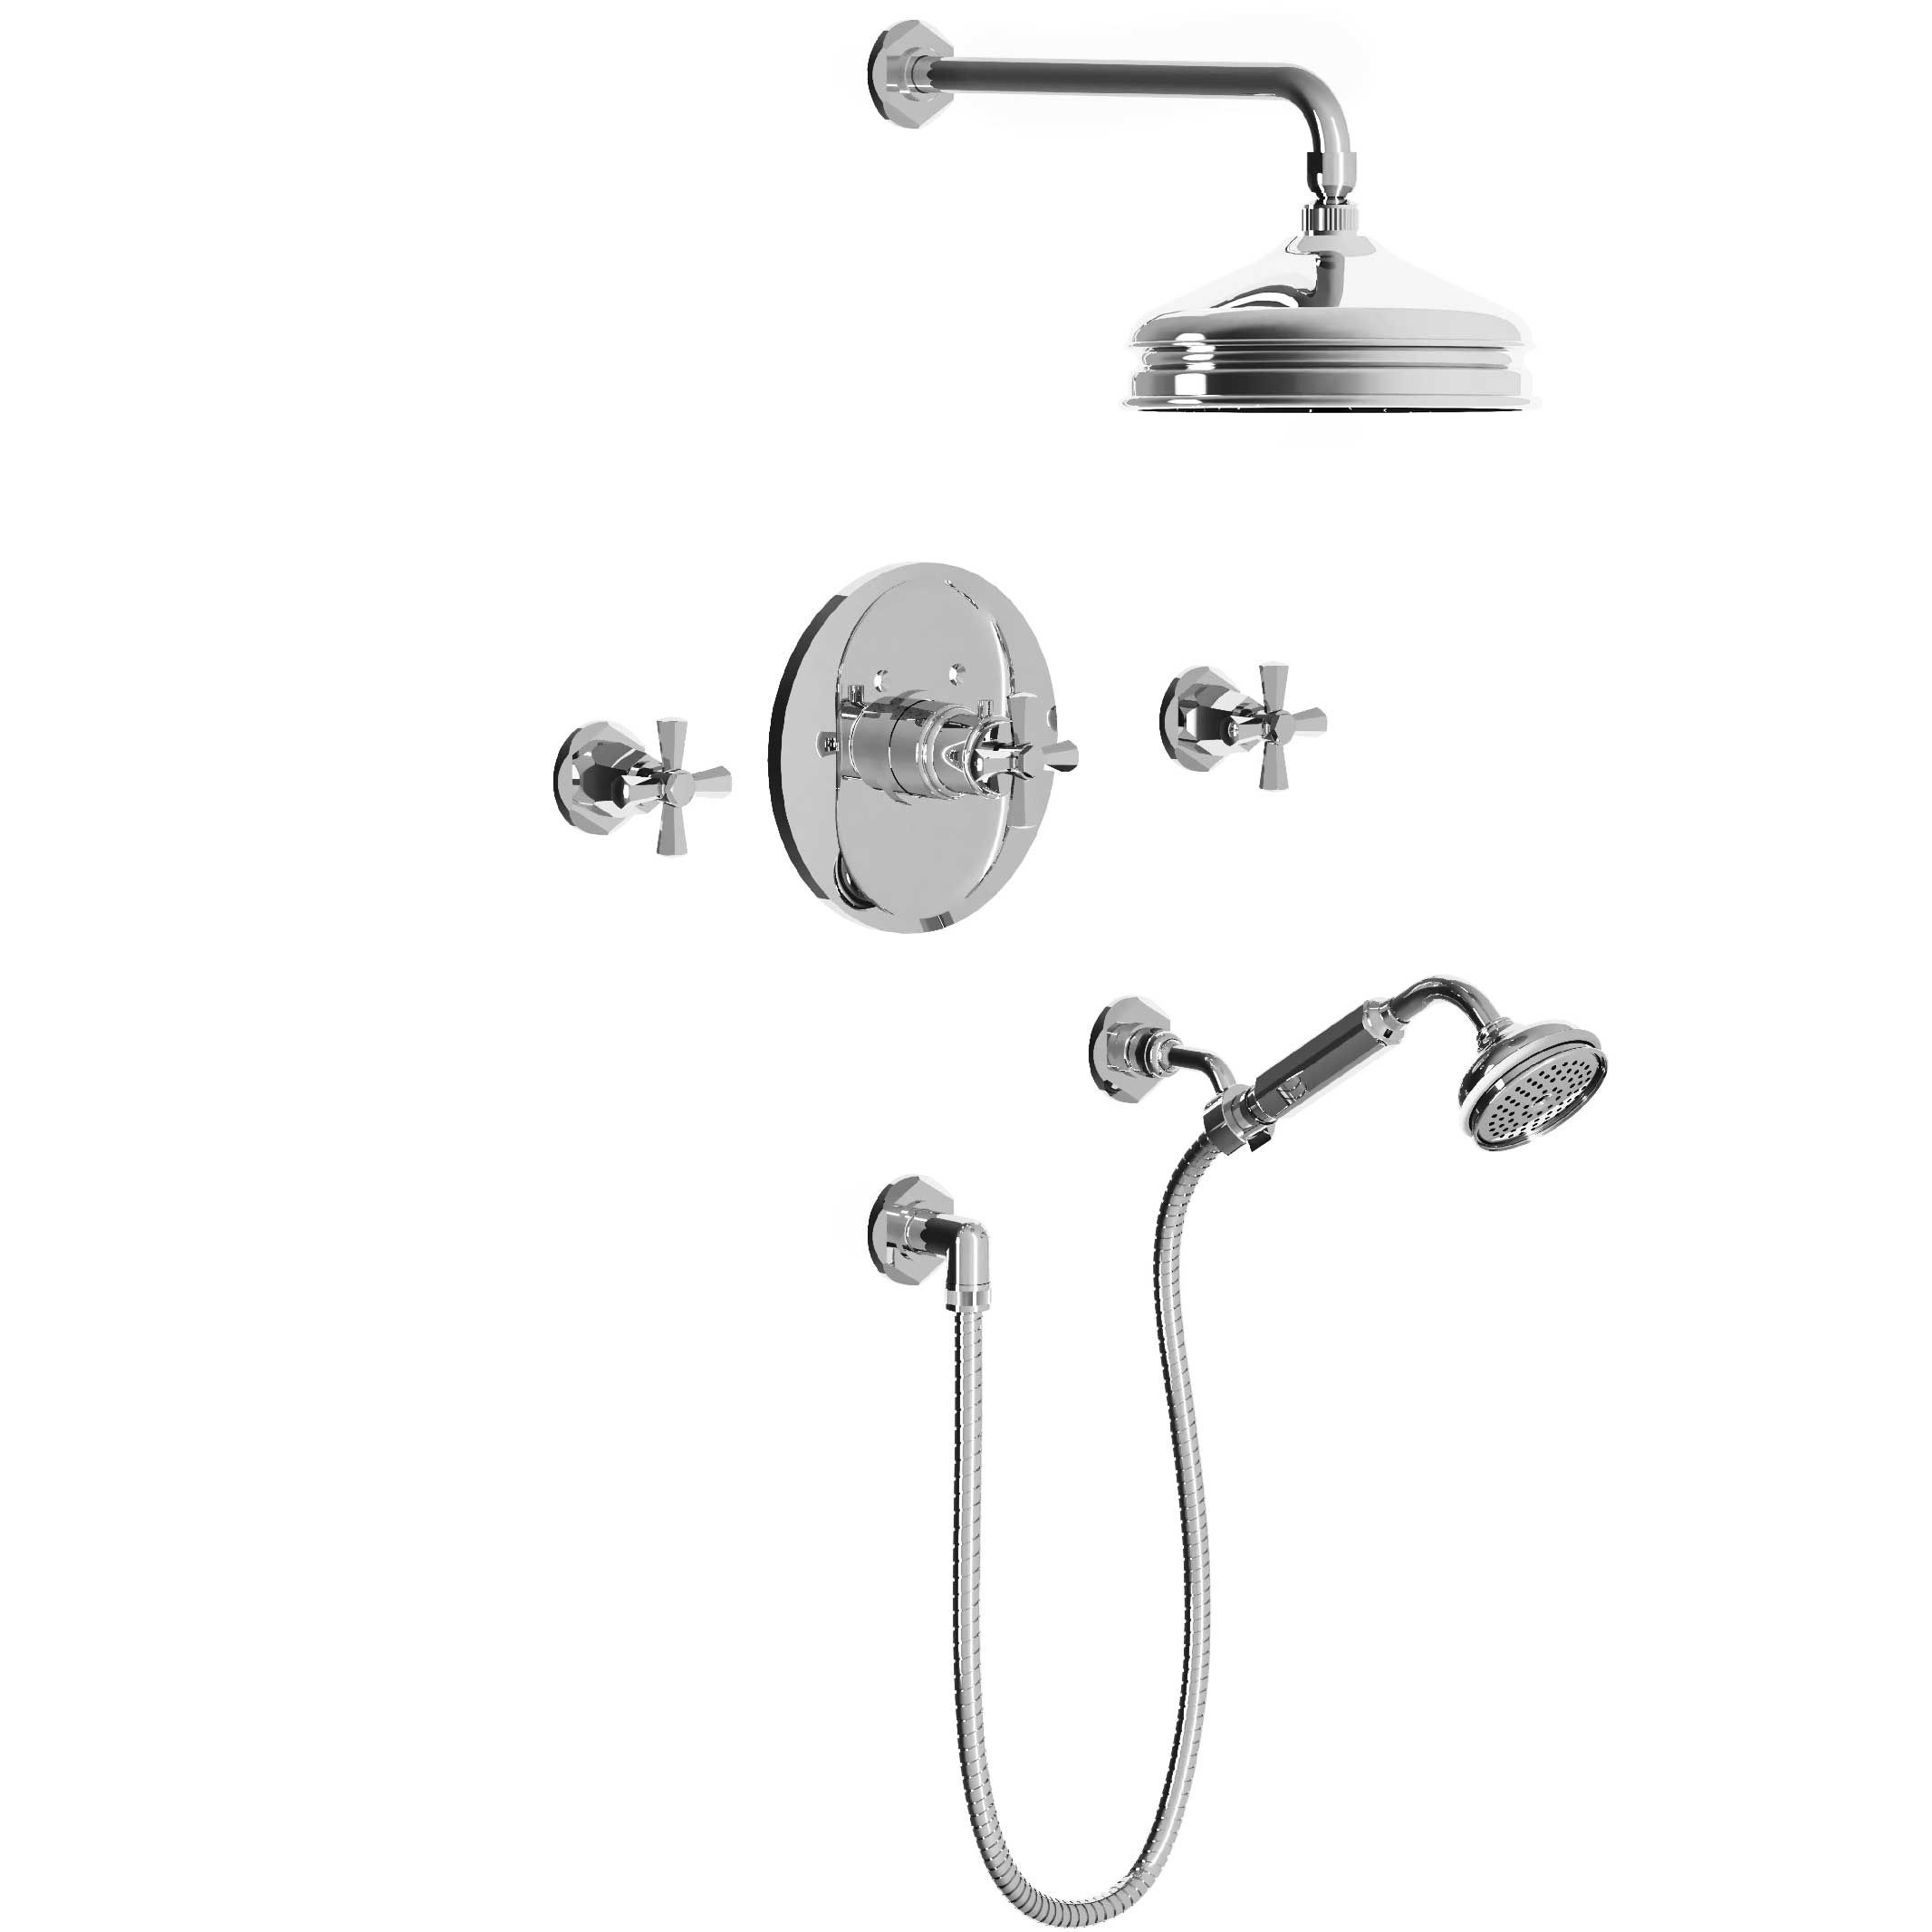 M13-2308T1 Thermostatic shower mixer package